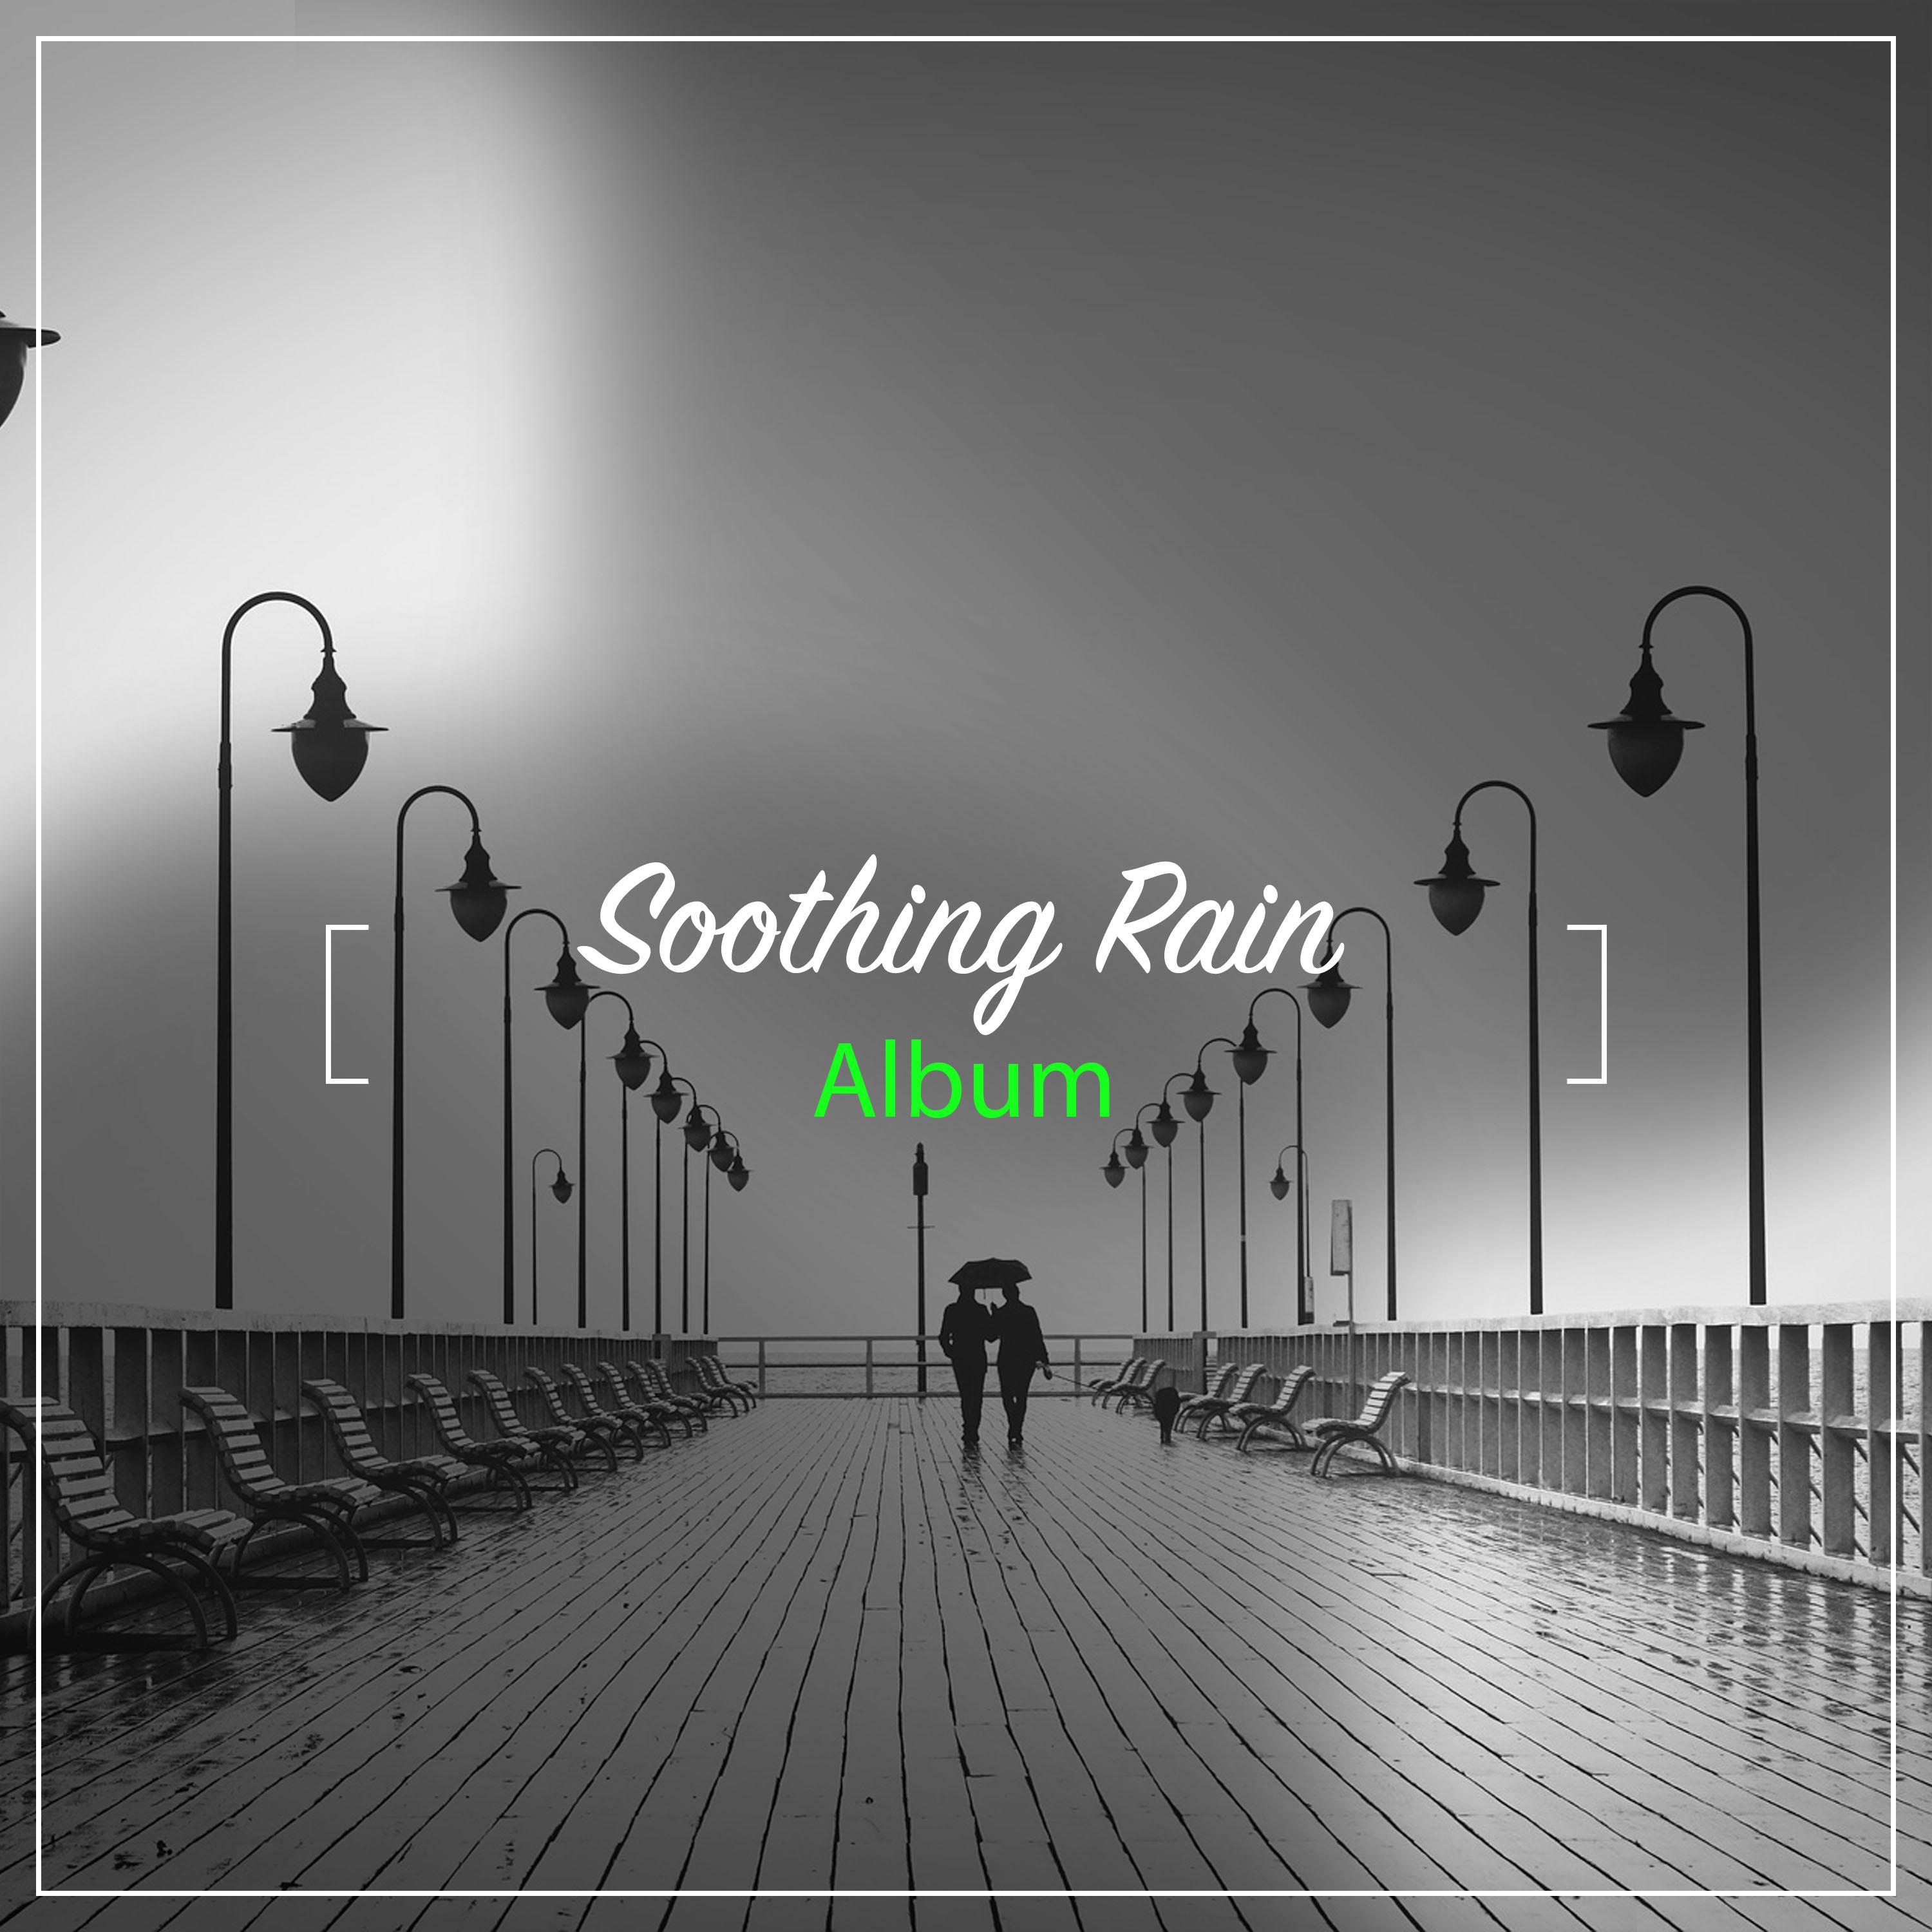 13 Soothing Rain Album for Study & Reflection